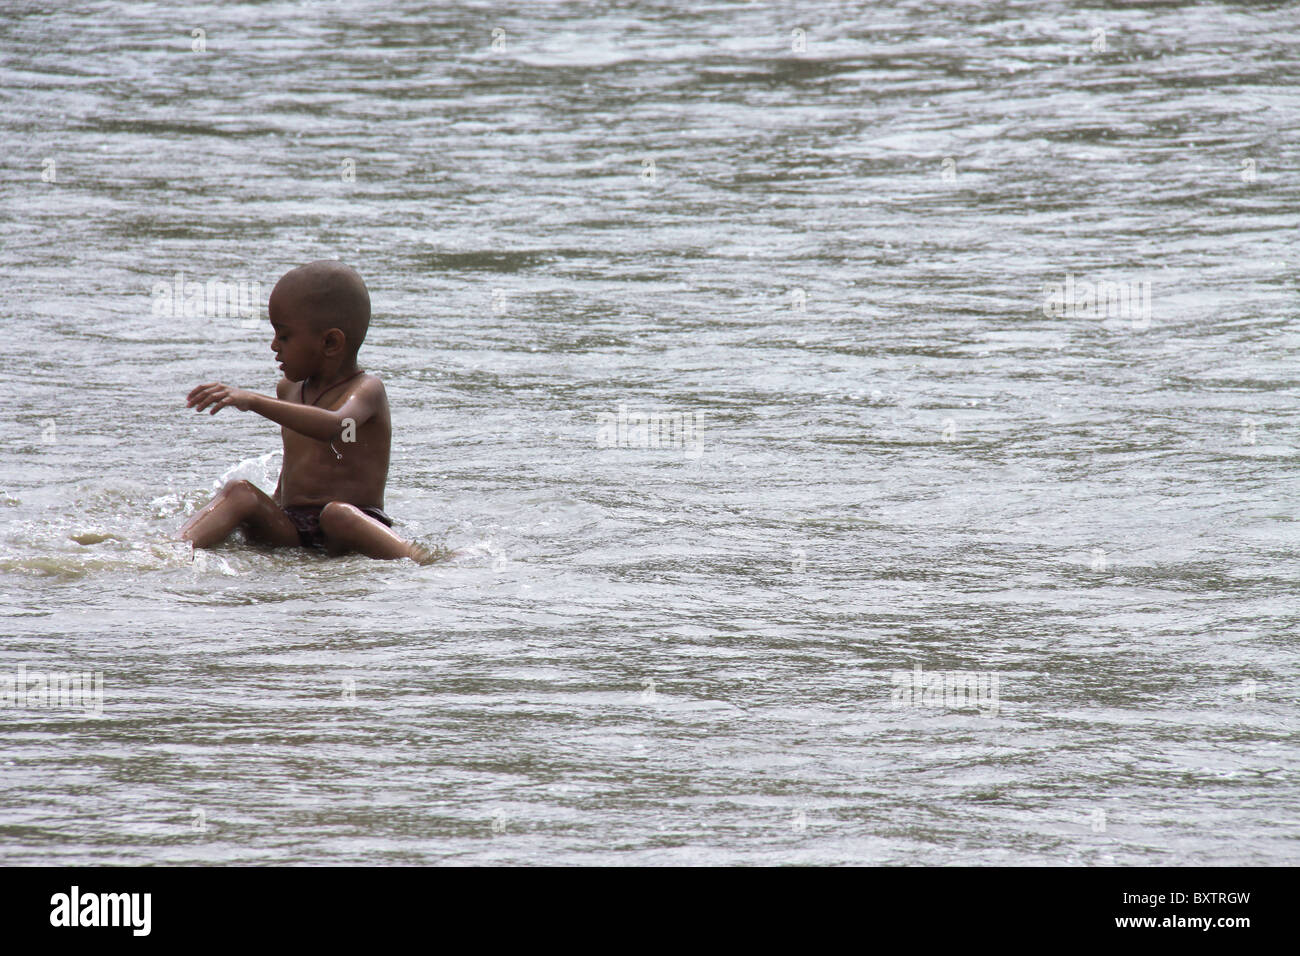 Boy on beach playing in water Stock Photo